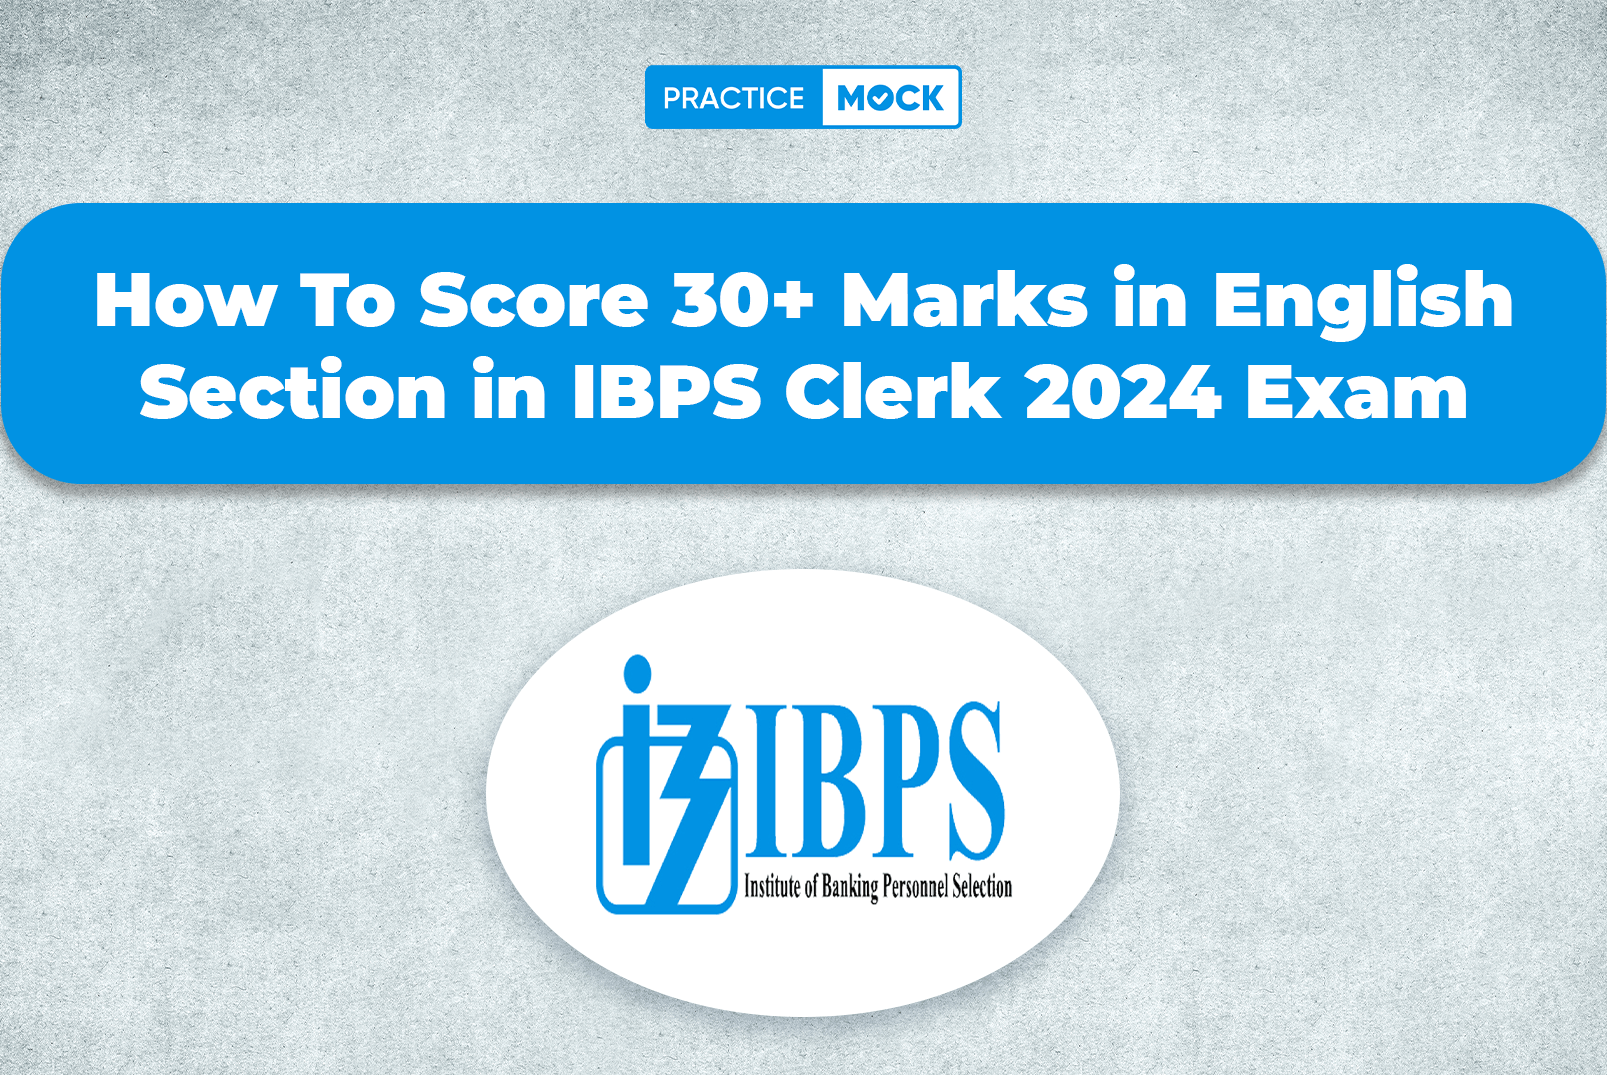 How To Score 25+ Marks In English Section For IBPS Clerk 2024 Exam